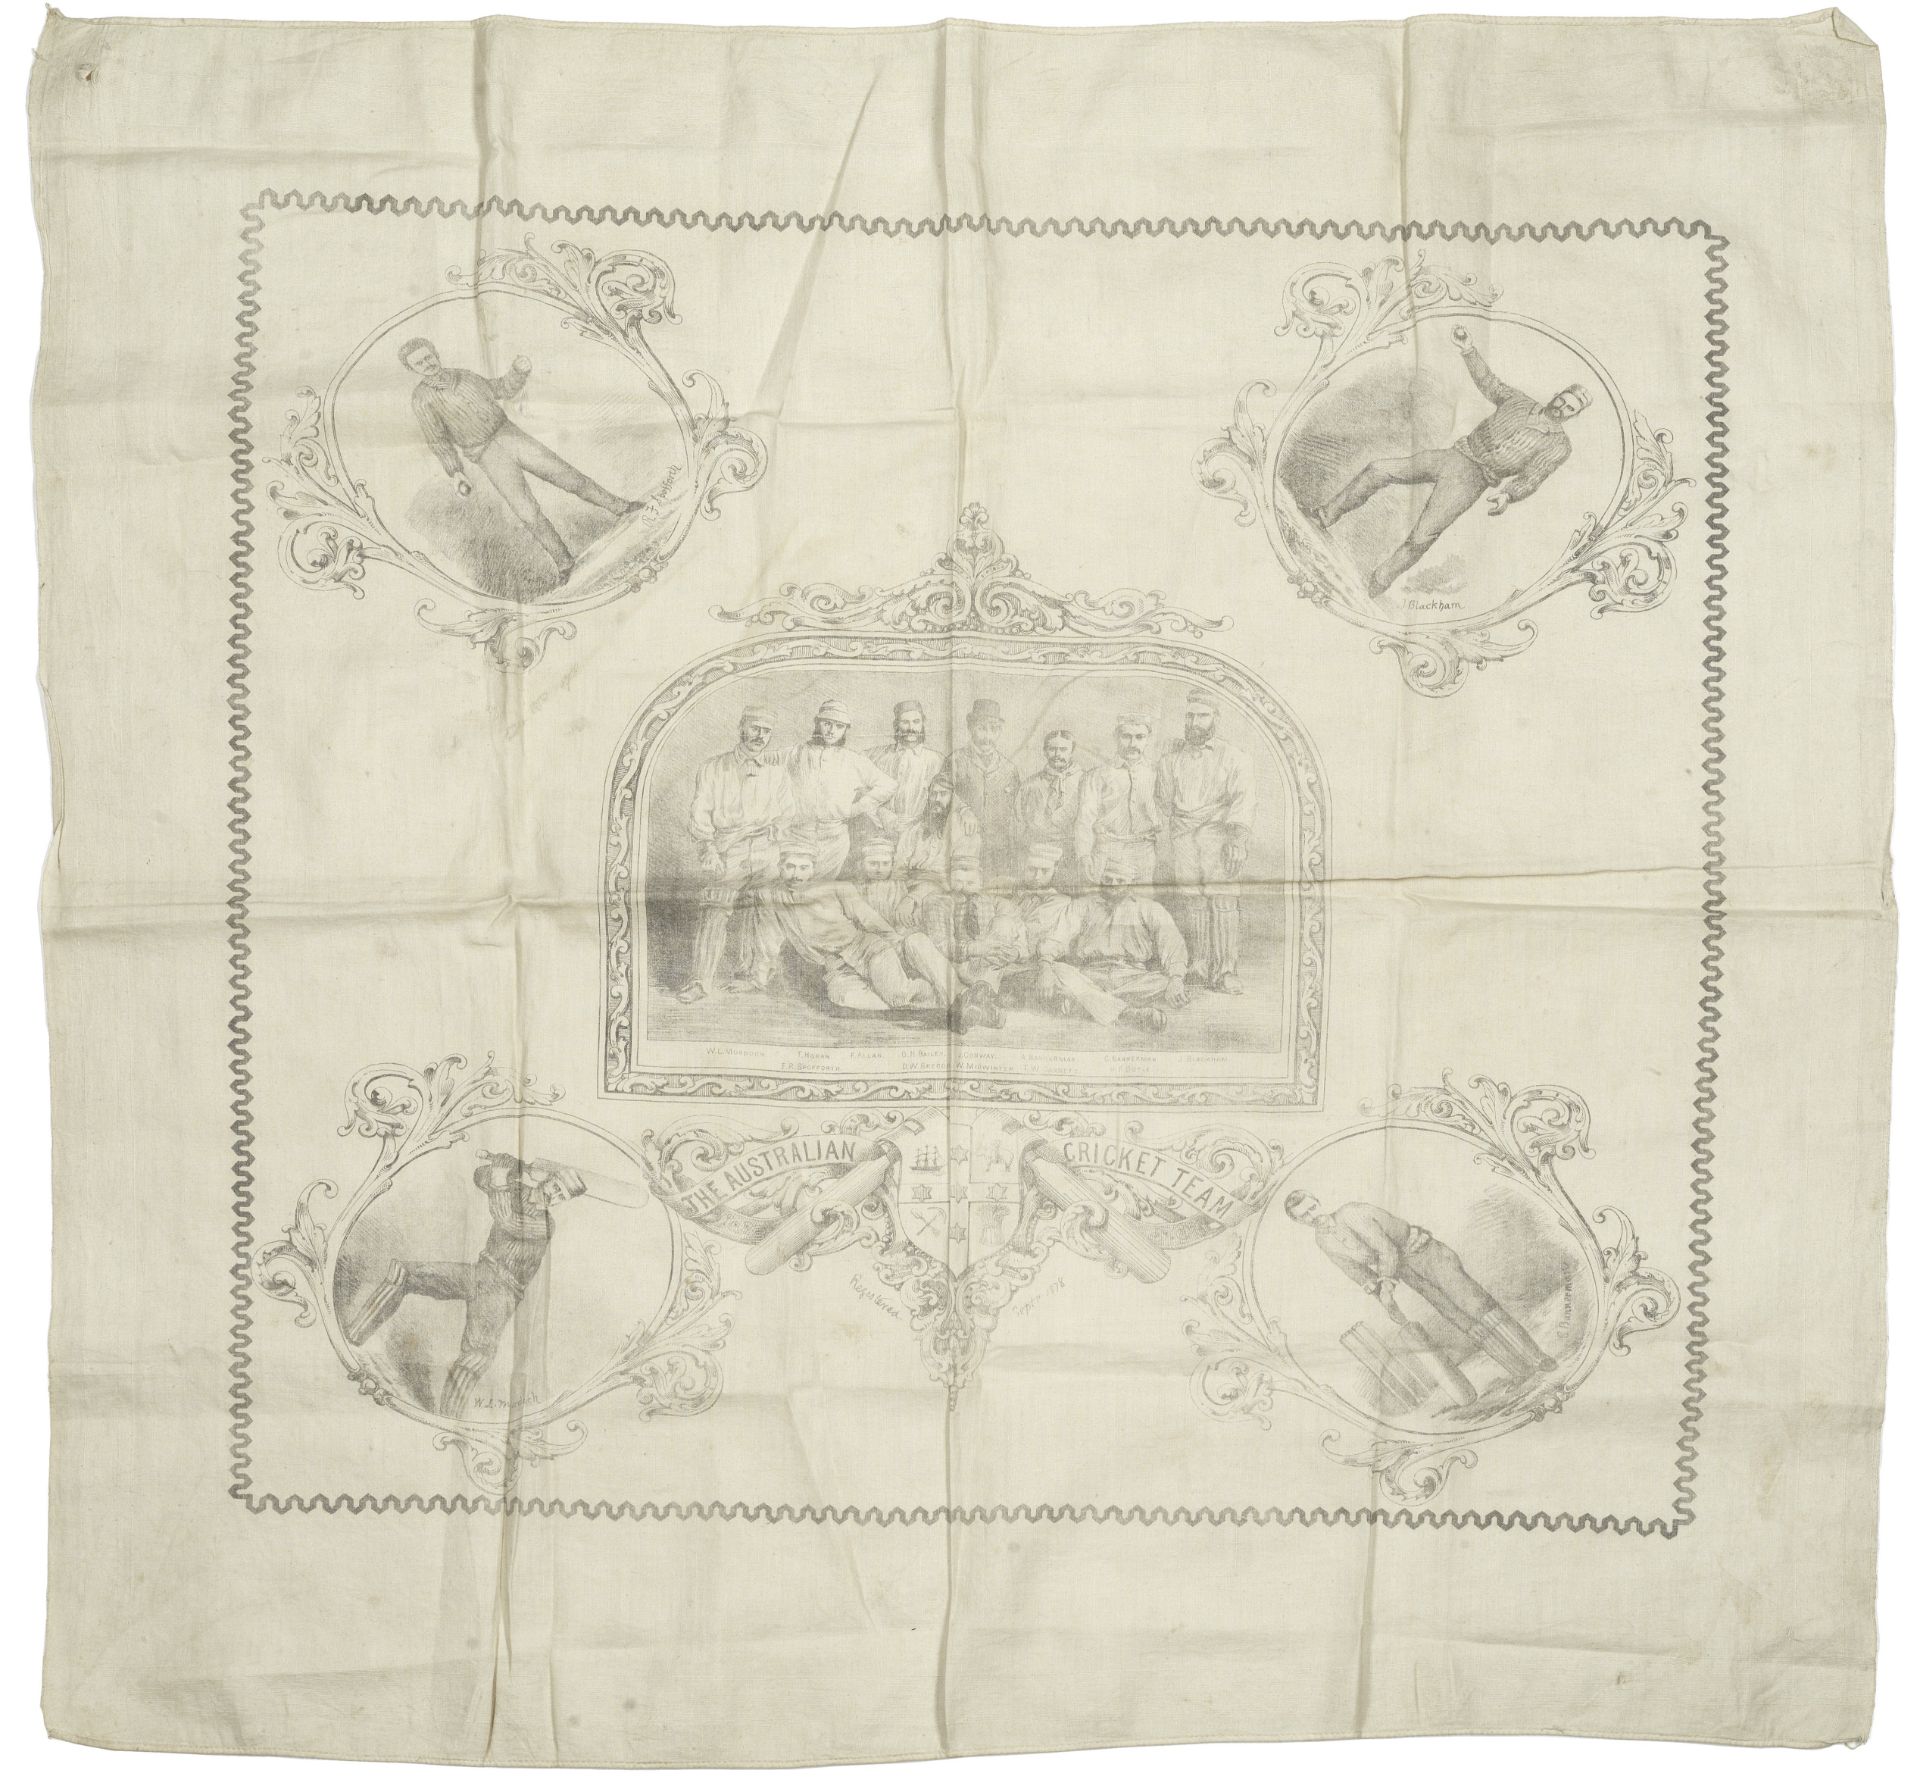 CRICKET 'The Australian Cricket Team' of 1878, commemorative handkerchief printed with central gr...